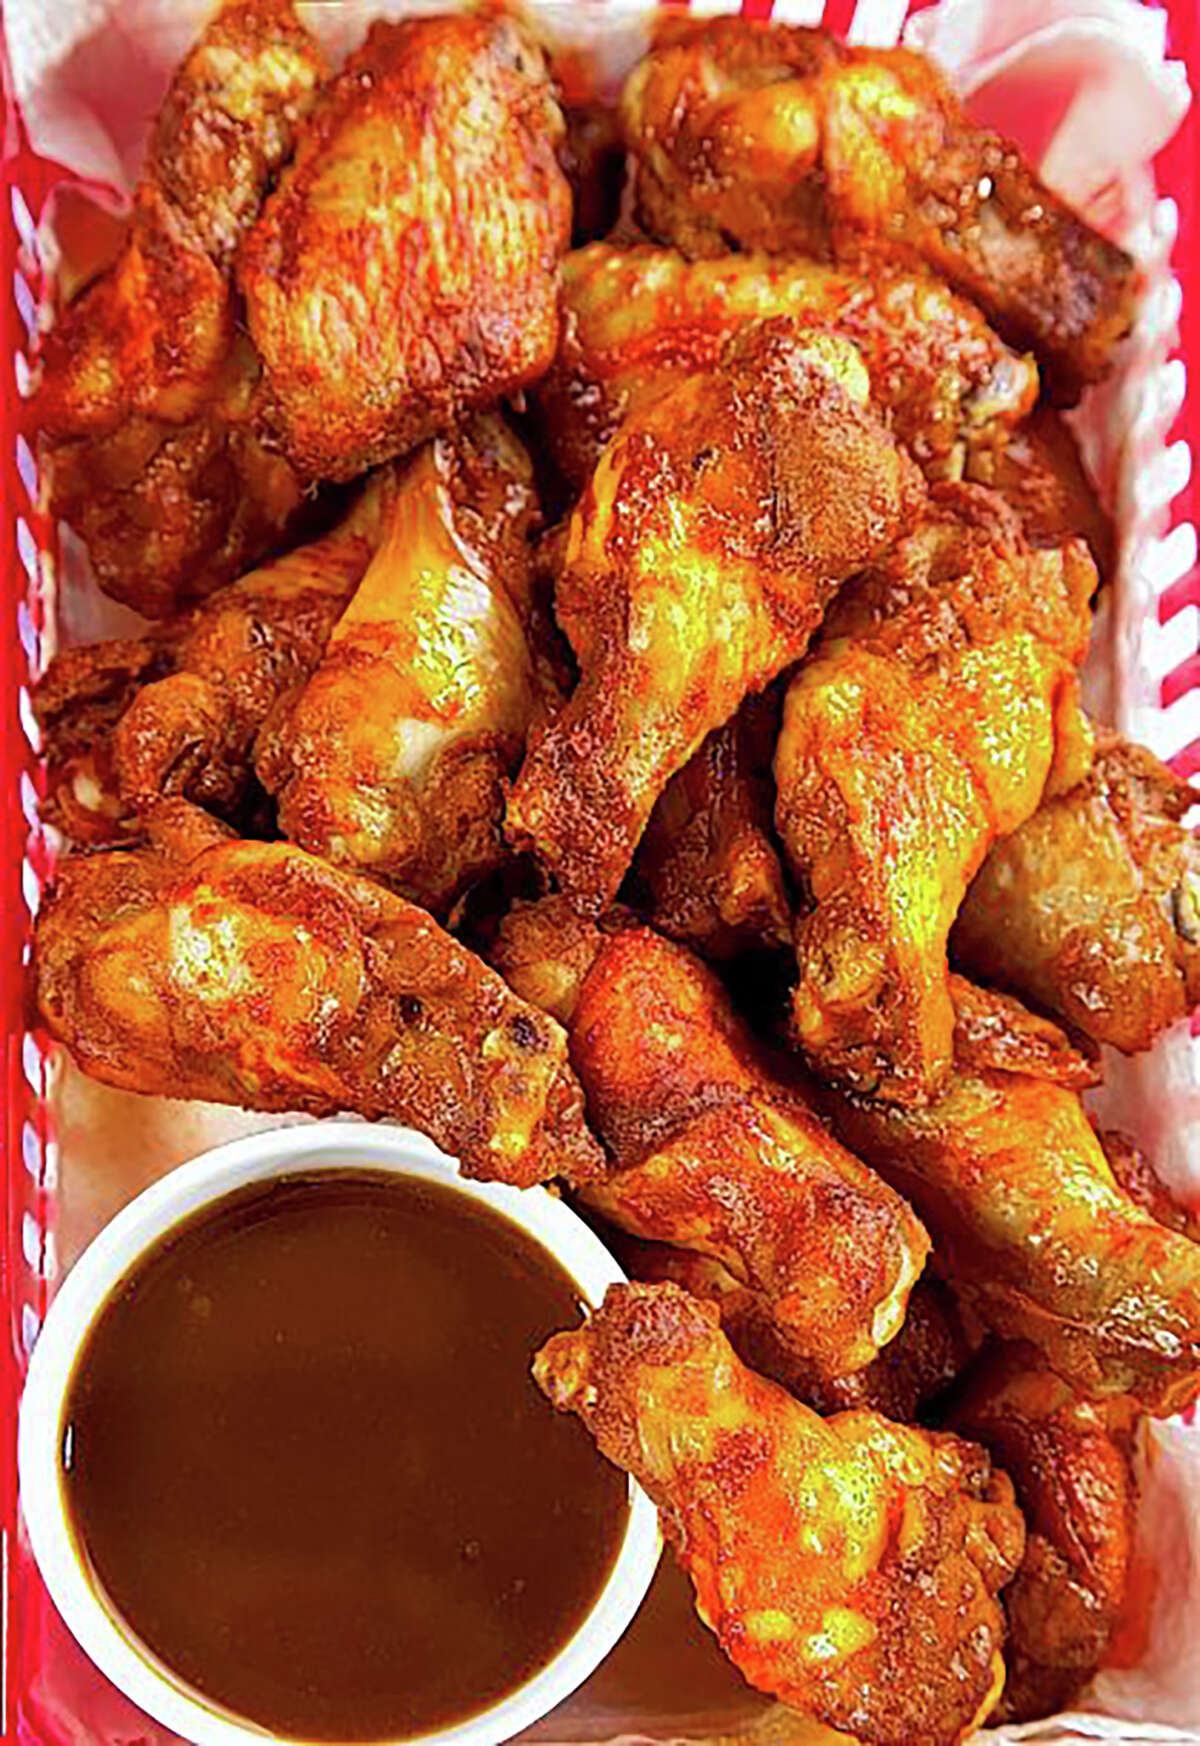 Chicken wings grew in popularity during the past year, spurred in part by people seeking comfort food and the fact that wings tend to be an easy carry-out menu item. While restaurants nationwide have reported a shortage of chicken wings, Jacksonville restaurants are having little trouble keeping them in stock. 